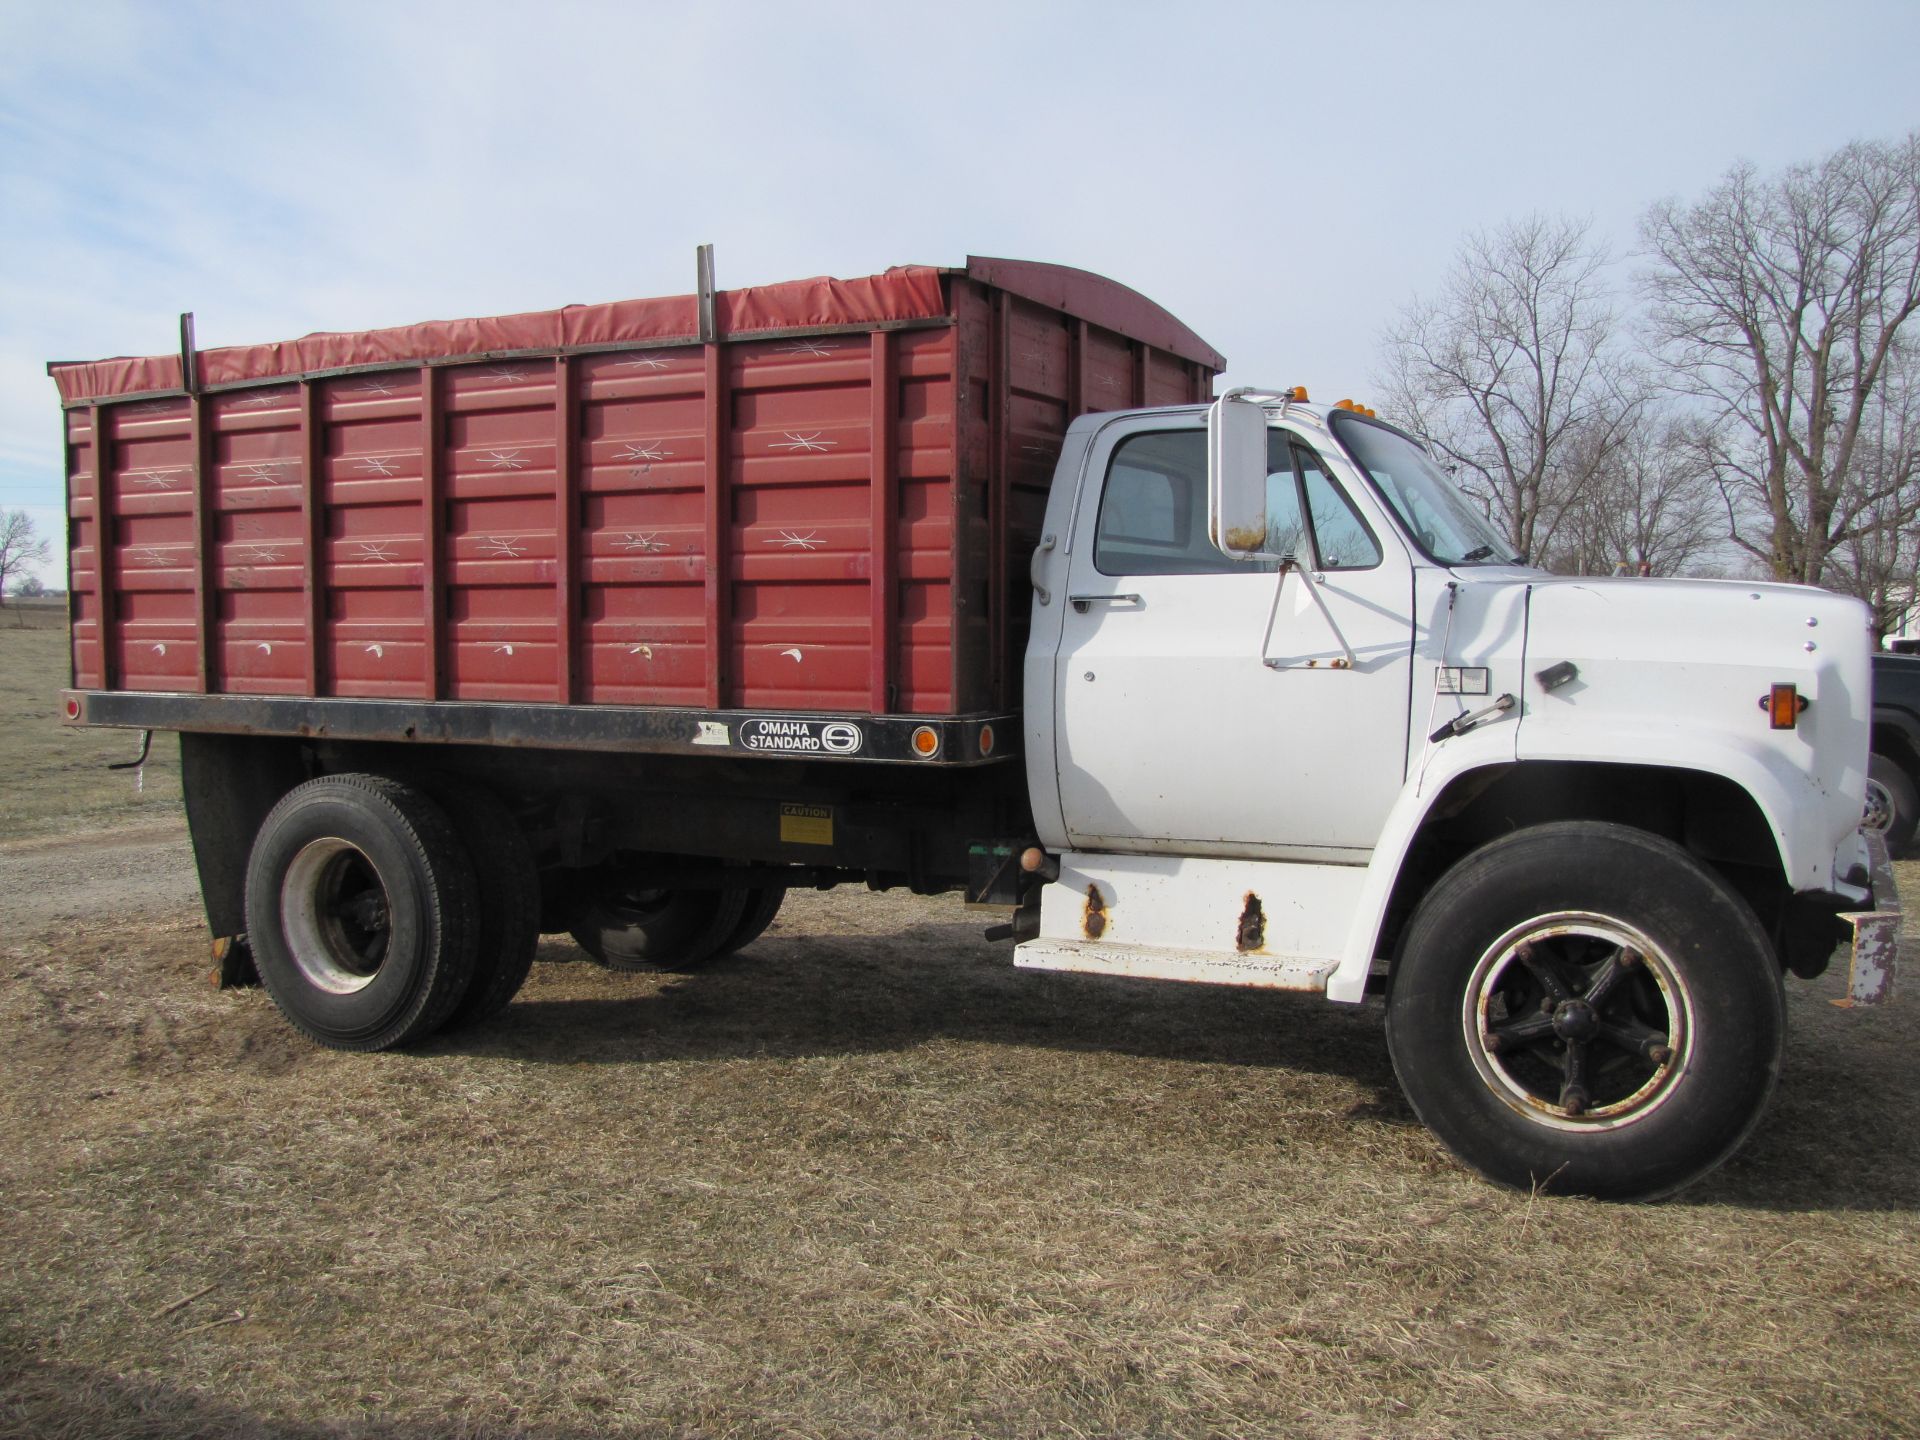 1983 Chevrolet C70 grain truck, 366 gas, 5+2 speed, single axle, 11R22.5 tires, shows 51,791 miles - Image 4 of 54